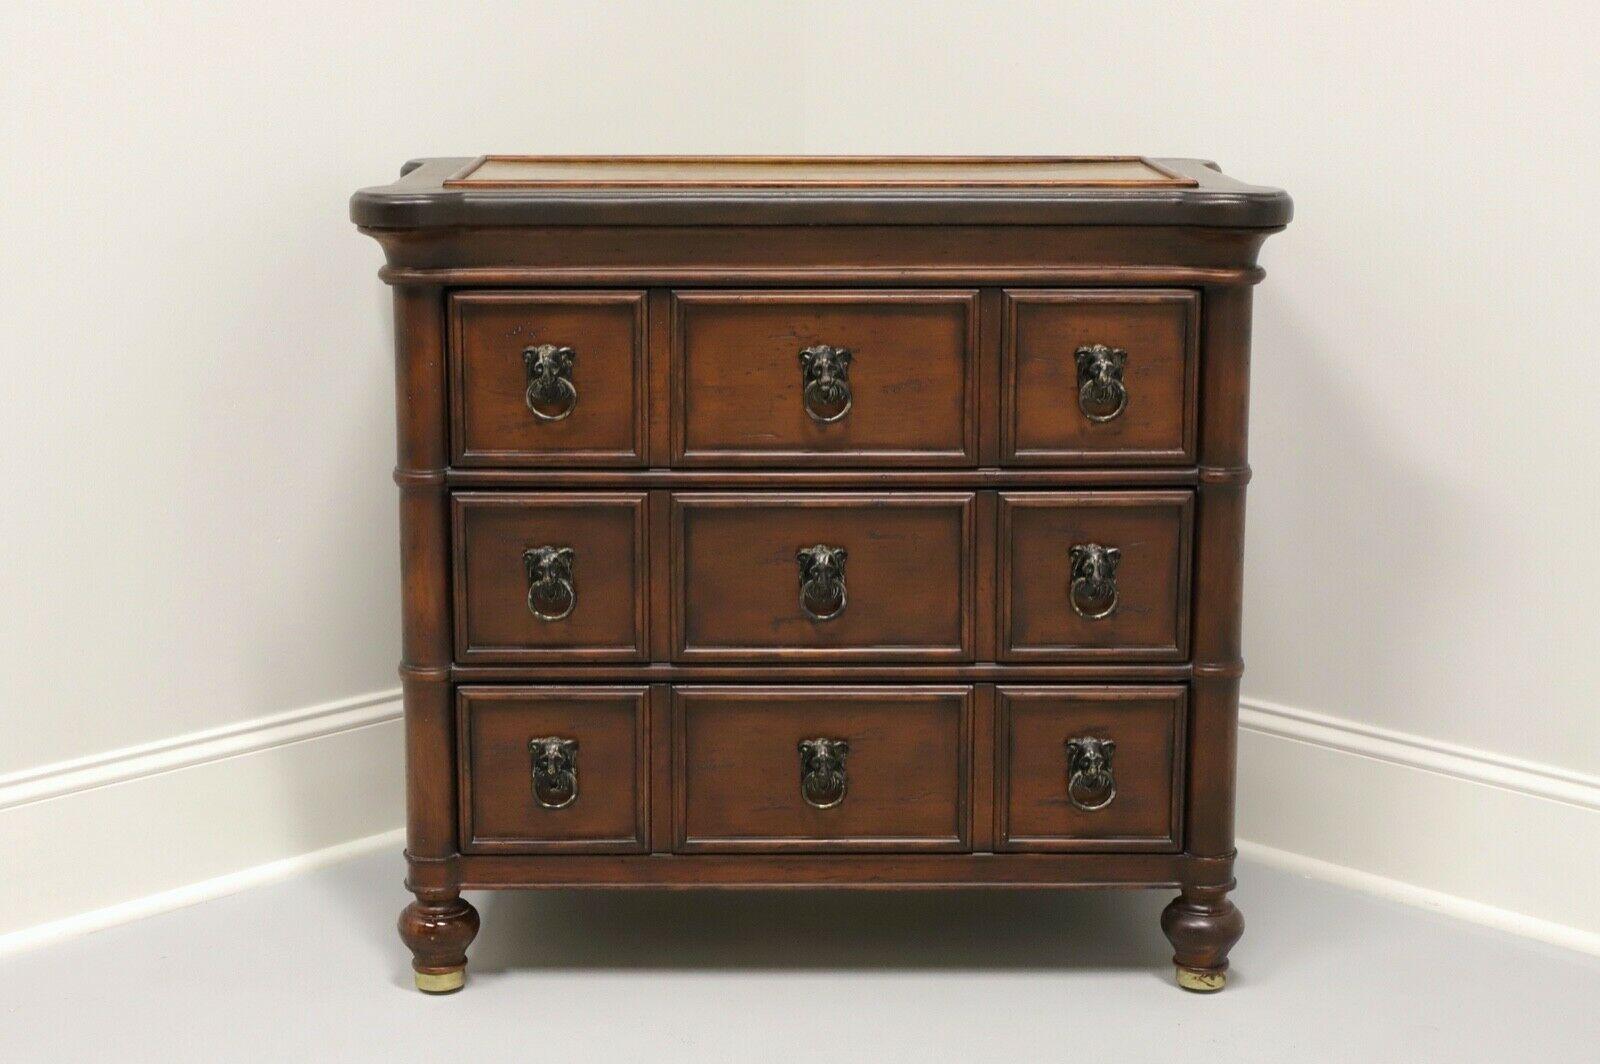 A Transitional style bedside chest by Ferguson Copeland, from their Highlands Collection. Hardwood construction with faux bamboo columns and trim. Three dovetail drawers with brass lion head pulls. Inlaid painted metal top with tooled leather